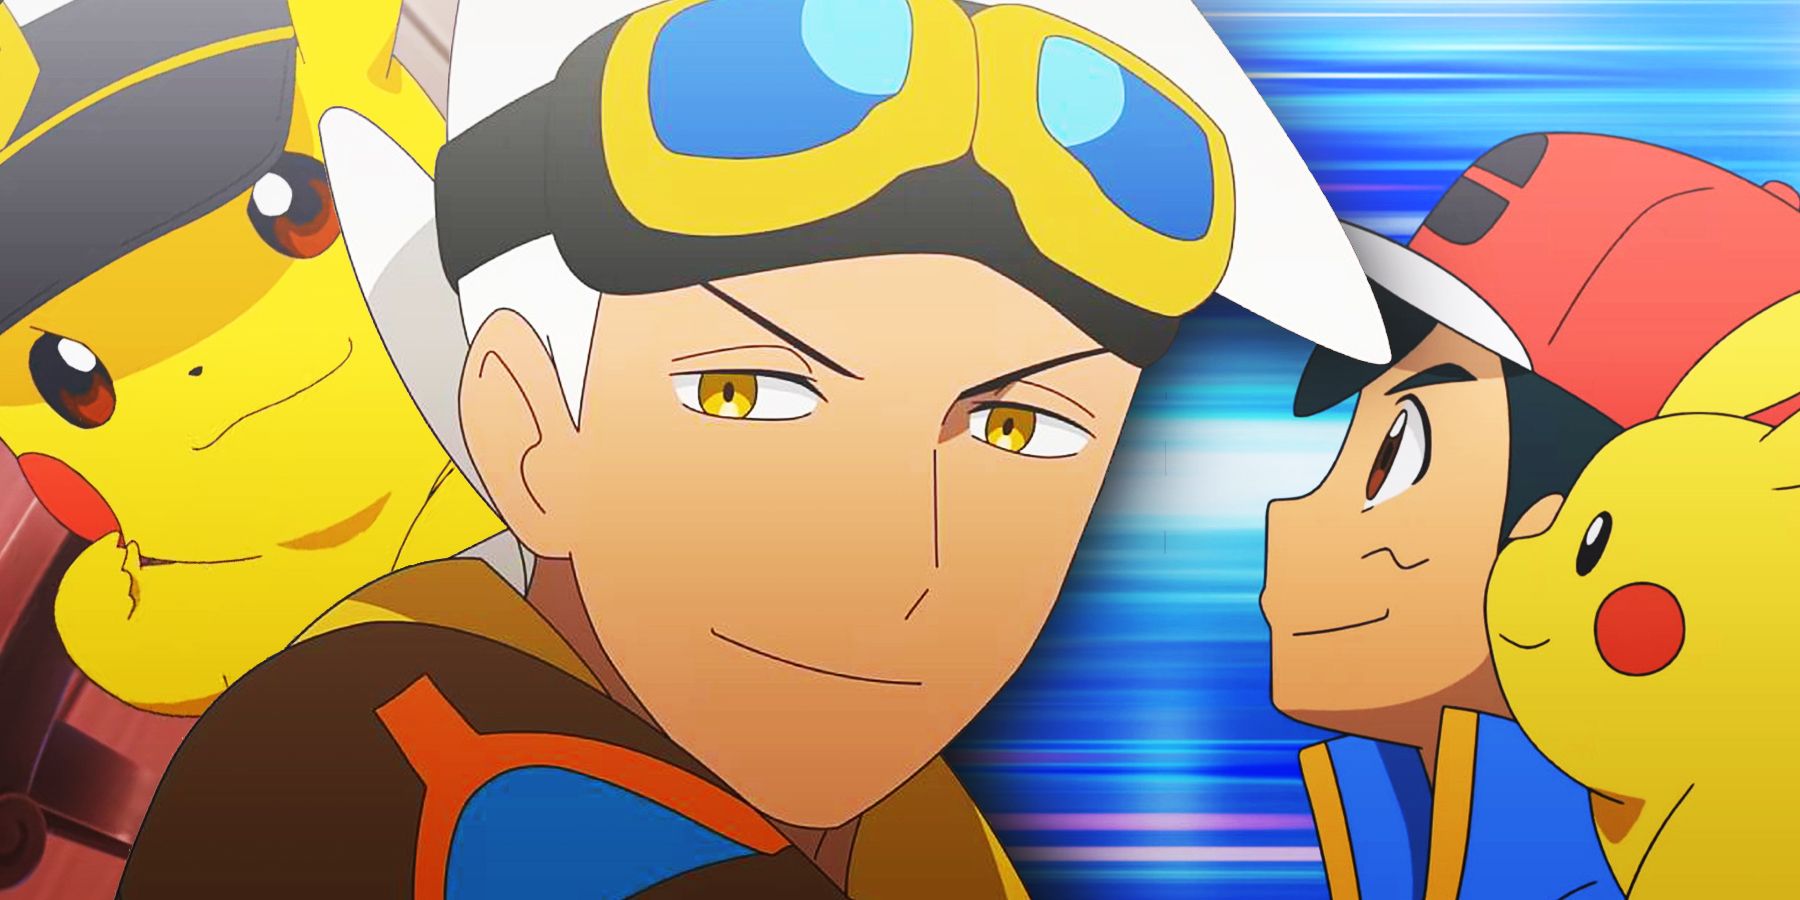 Friede of Pokemon Horizons with his Pikachu, and Ash with his Pikachu.